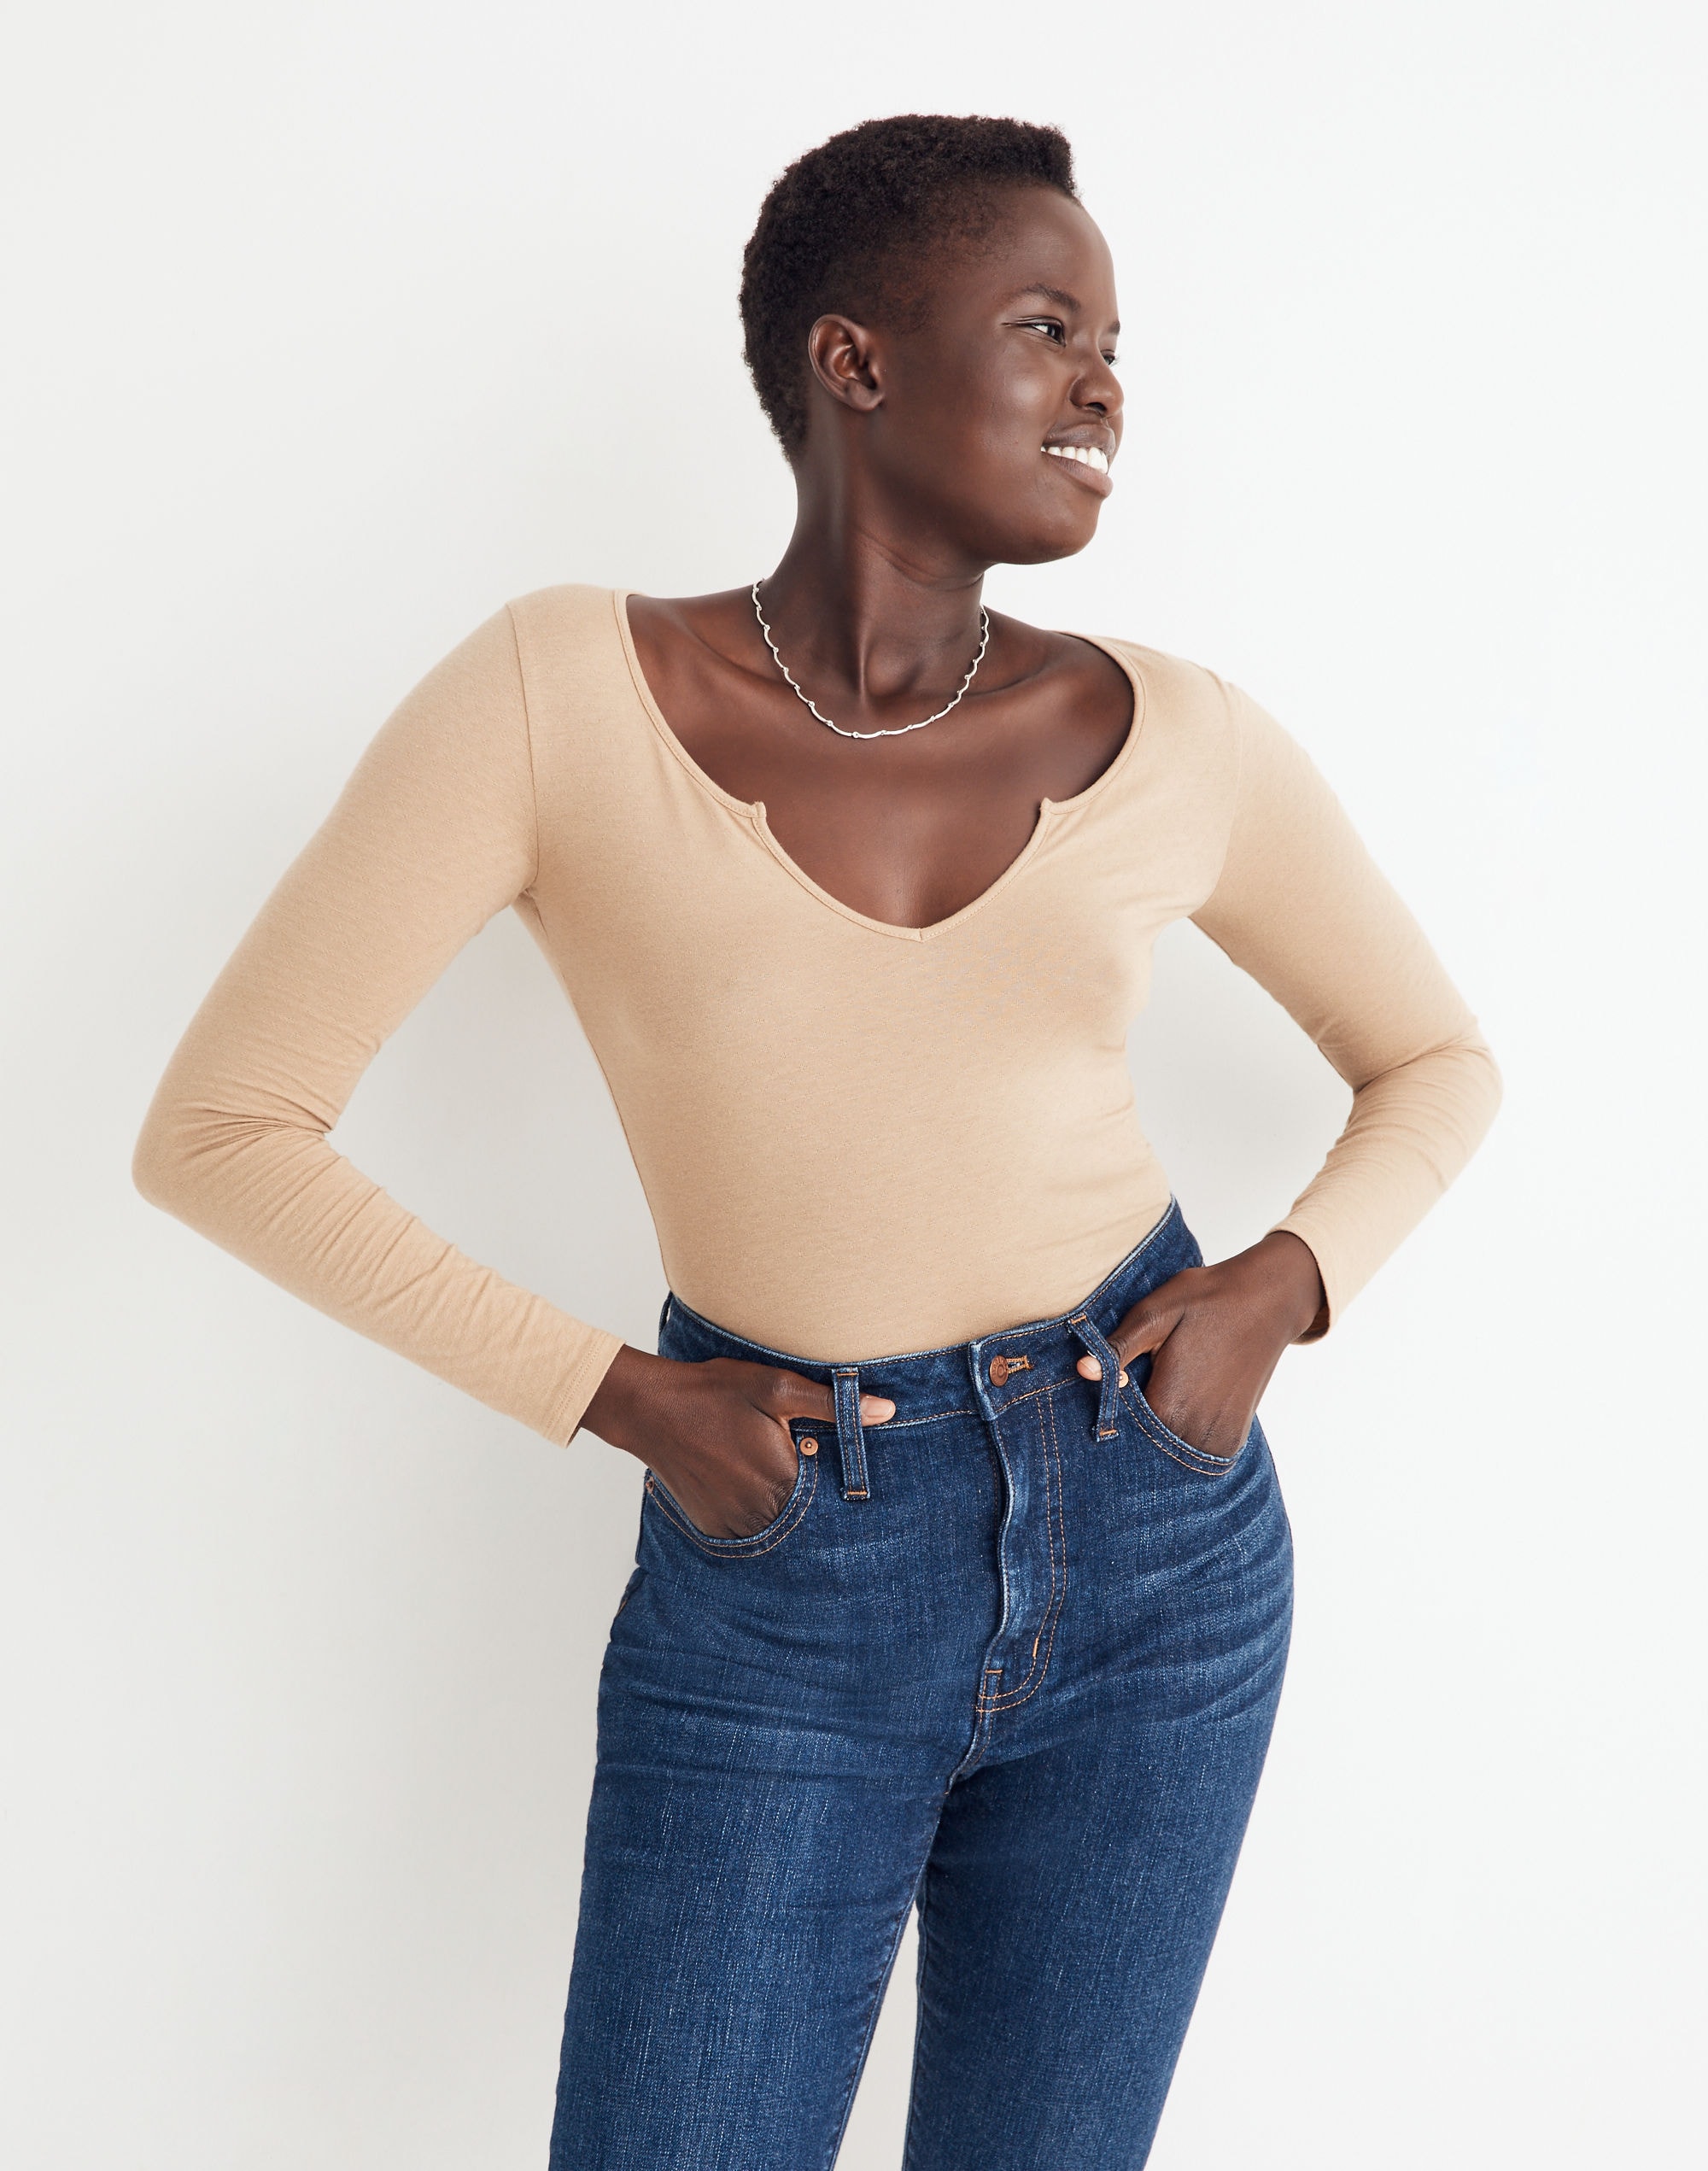 https://www.madewell.com/images/NG562_KH0042_m